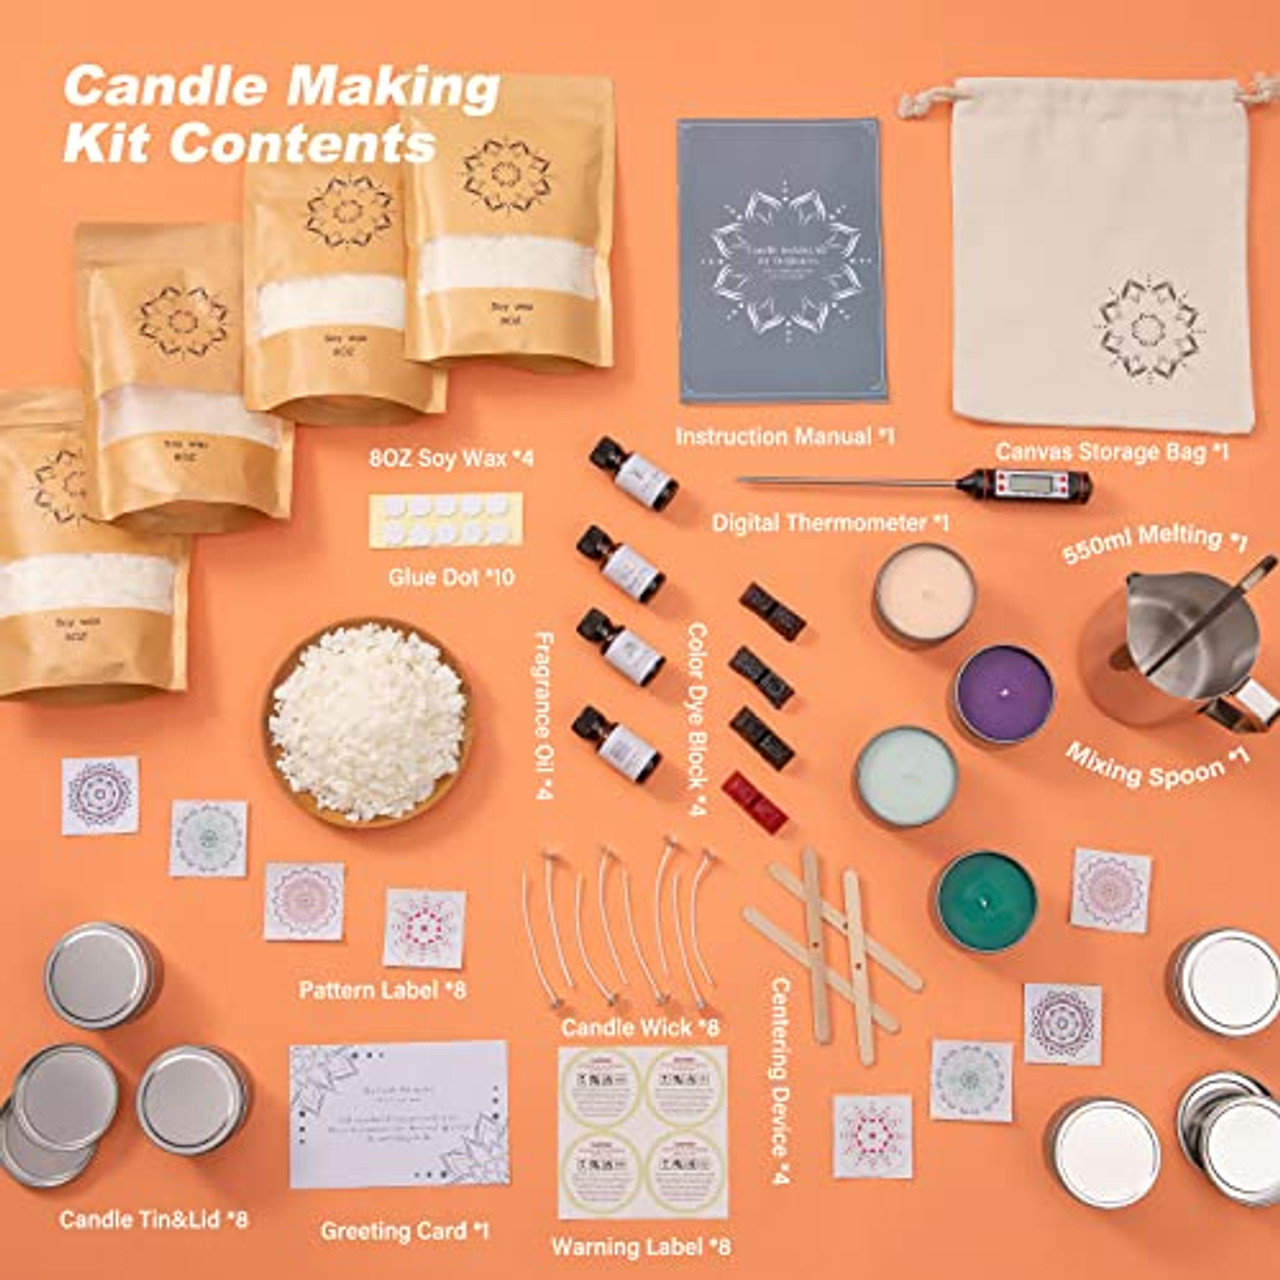 Digital Thermometer Candles, Paraffin Wax Candle Making